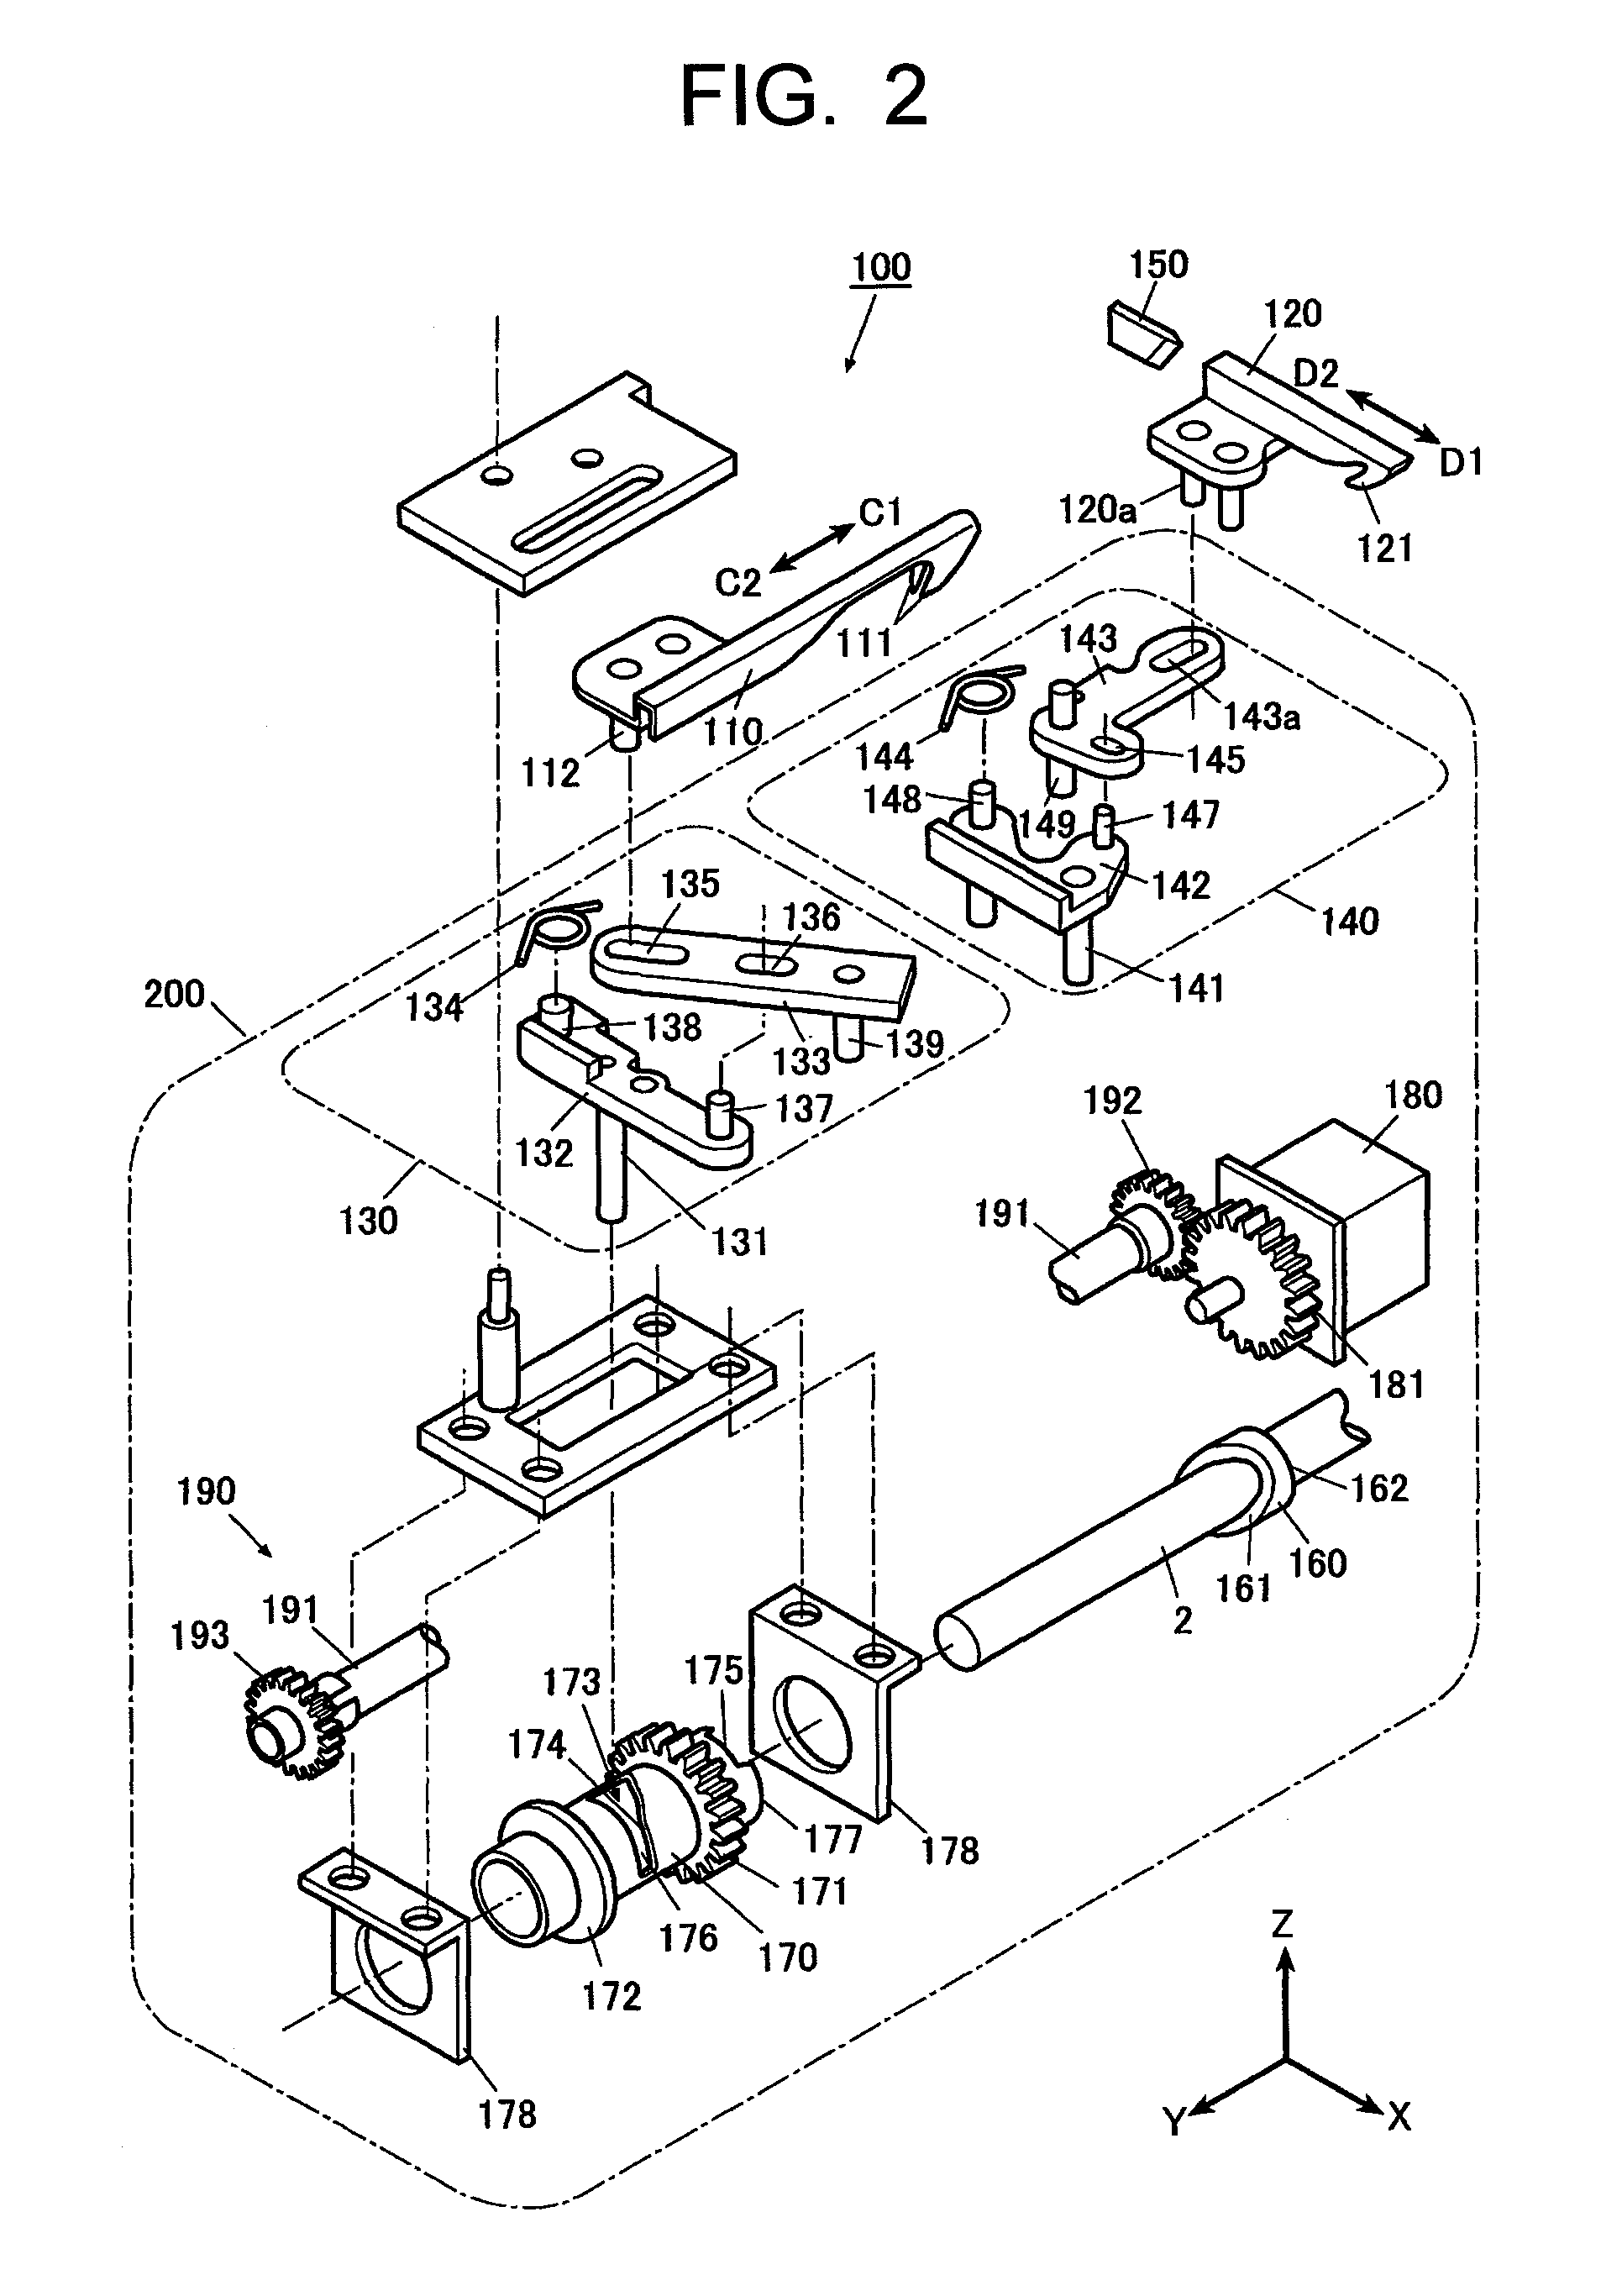 Thread cutting device of sewing machine